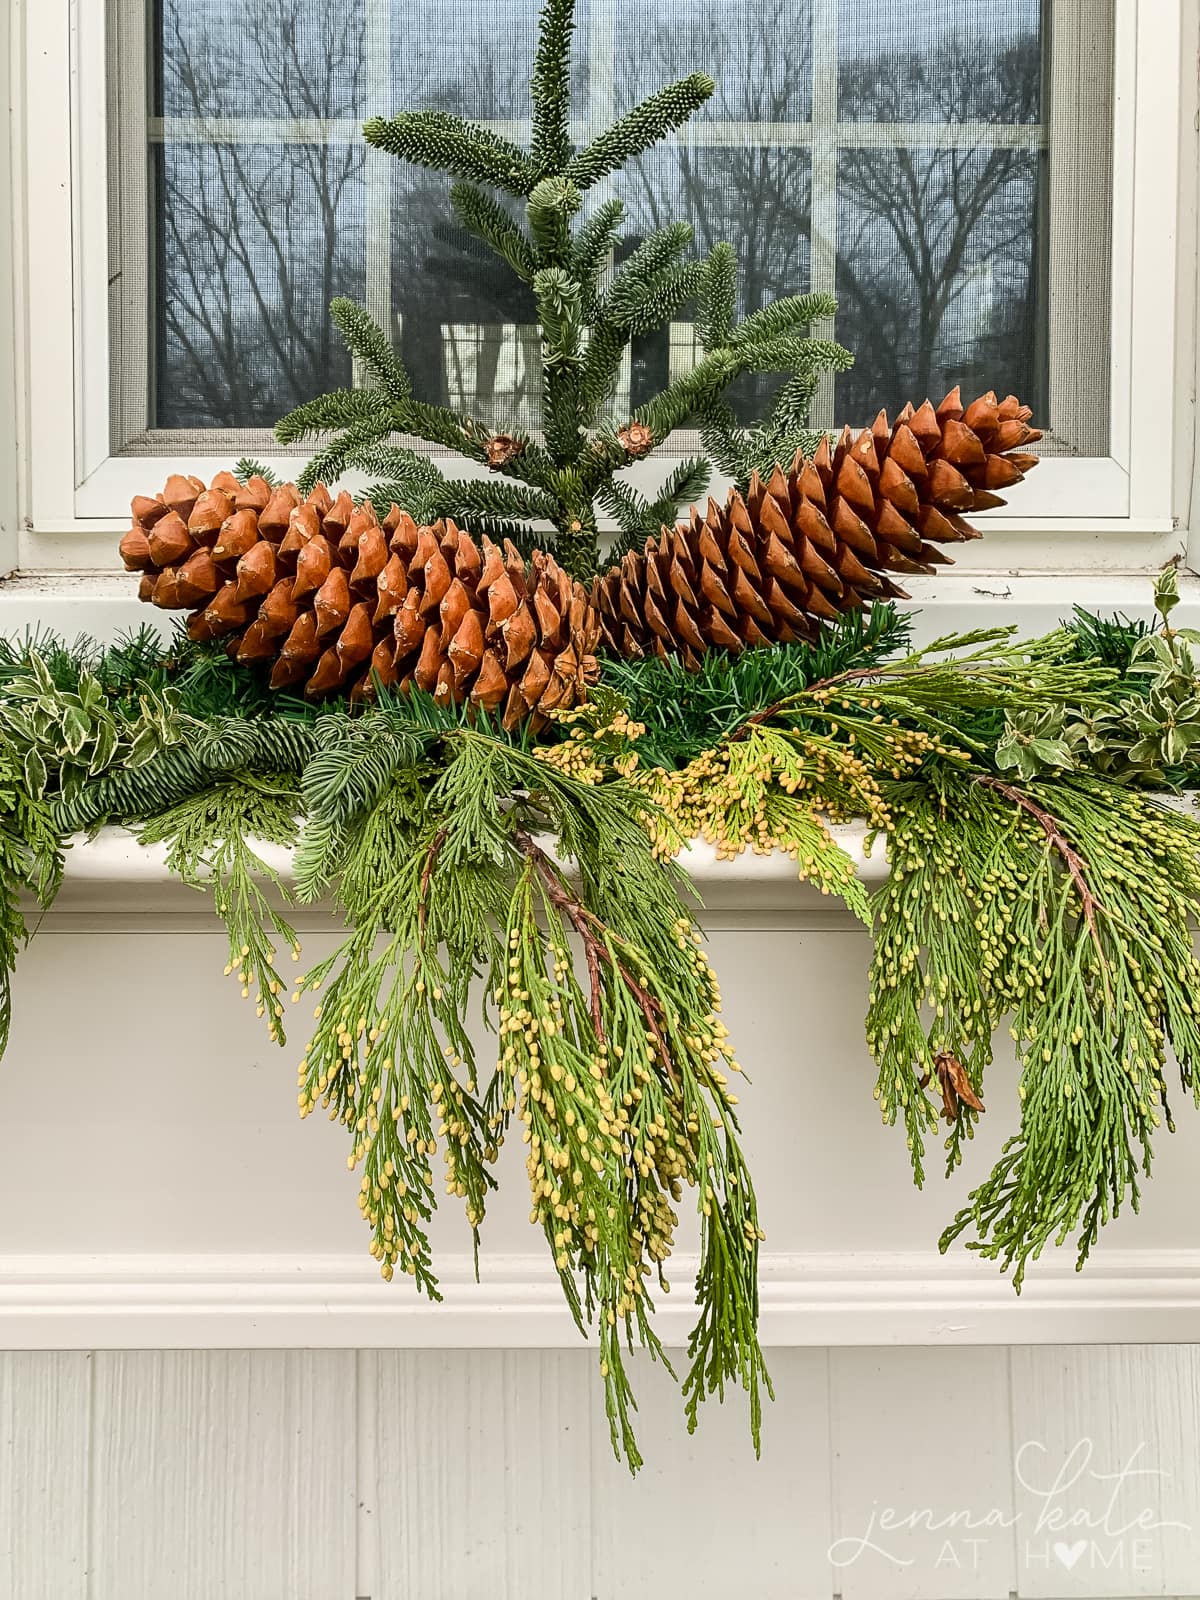 Large pinecones added to the window box arrangement